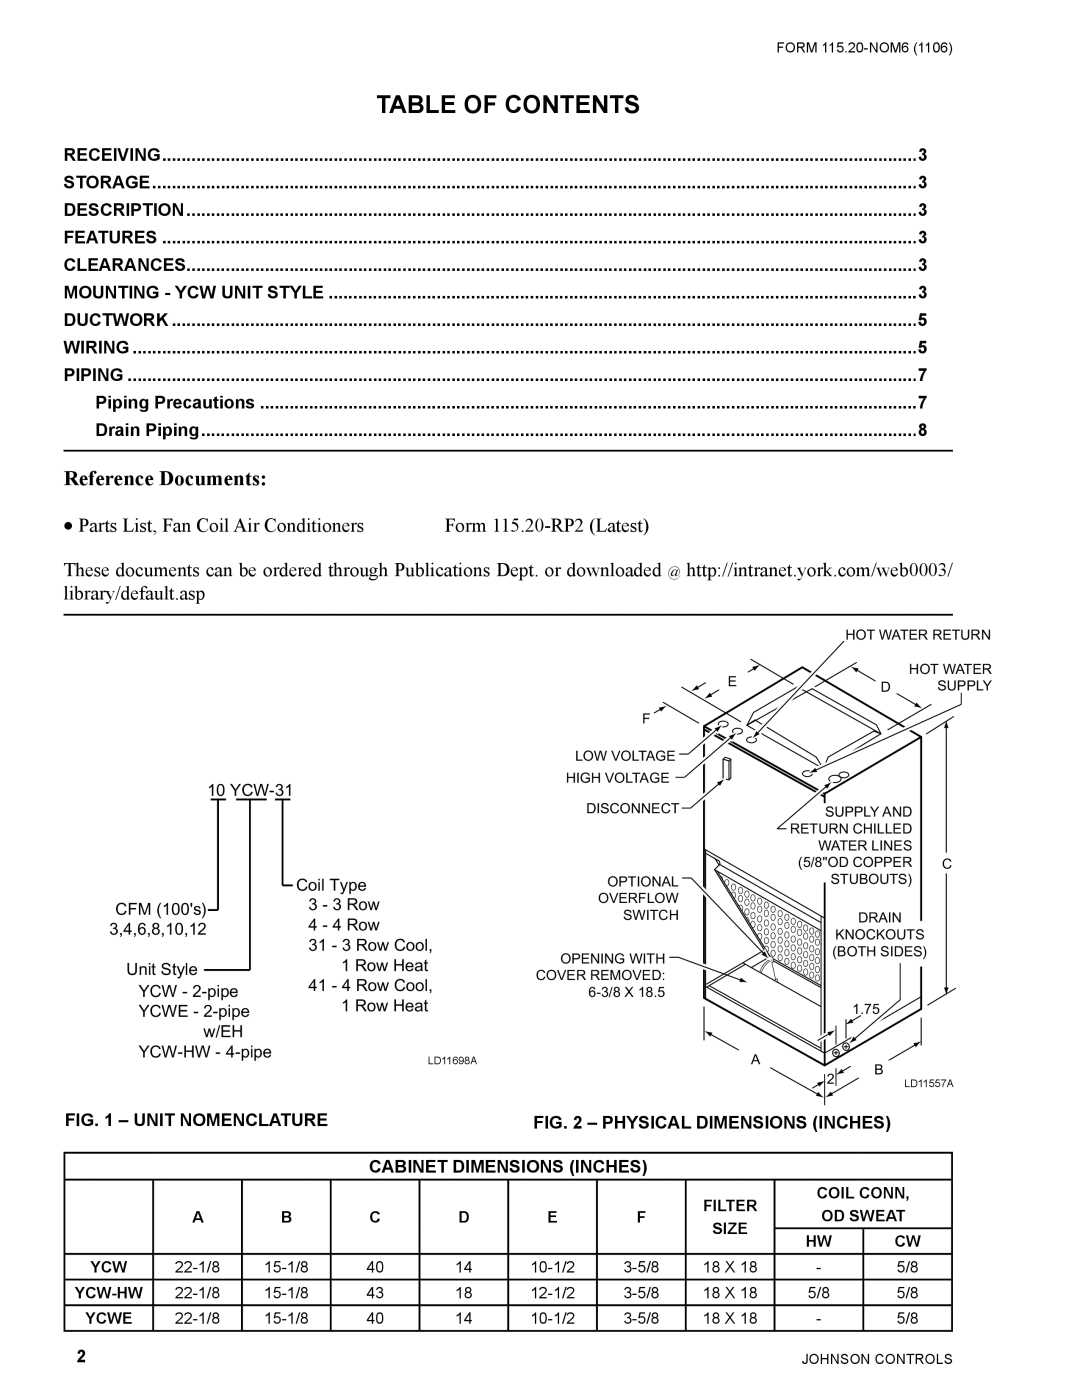 York LD11555 Table Of Contents, Reference Documents, Parts List, Fan Coil Air Conditioners, Form 115.20-RP2Latest, Storage 